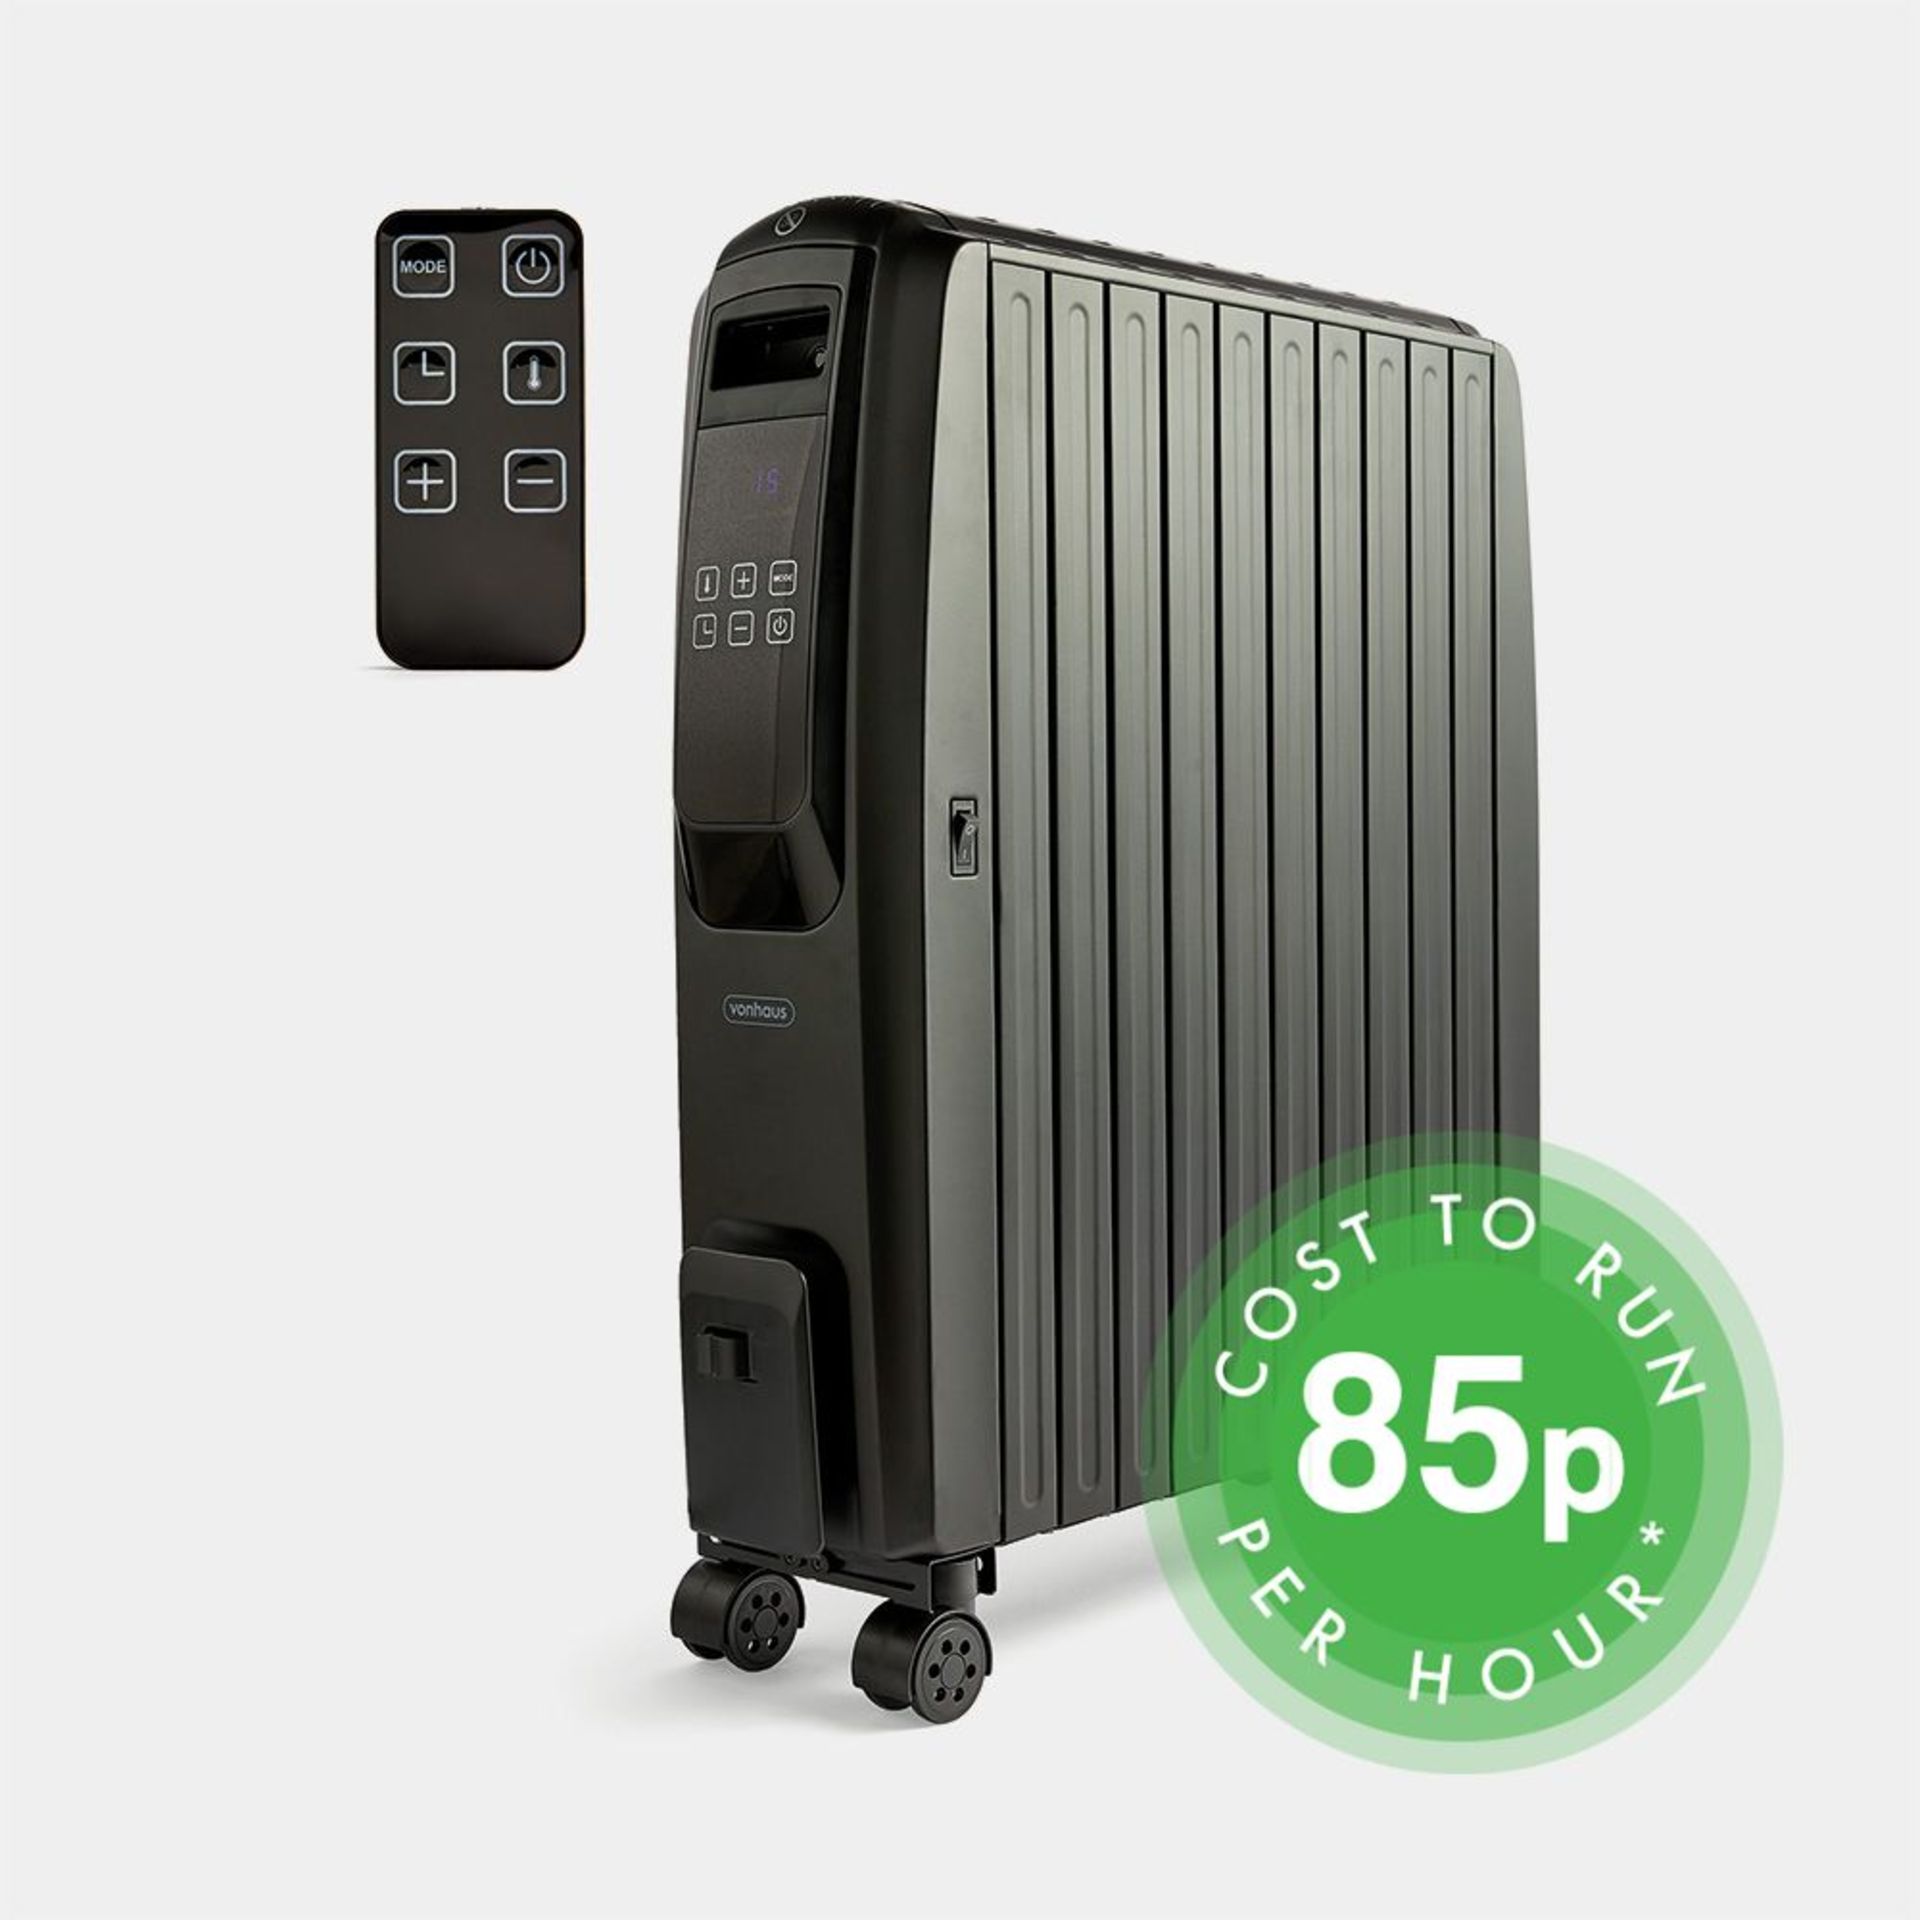 2500W Digital Oil Filled Radiator. If you're looking to heat your room up quickly, the clever